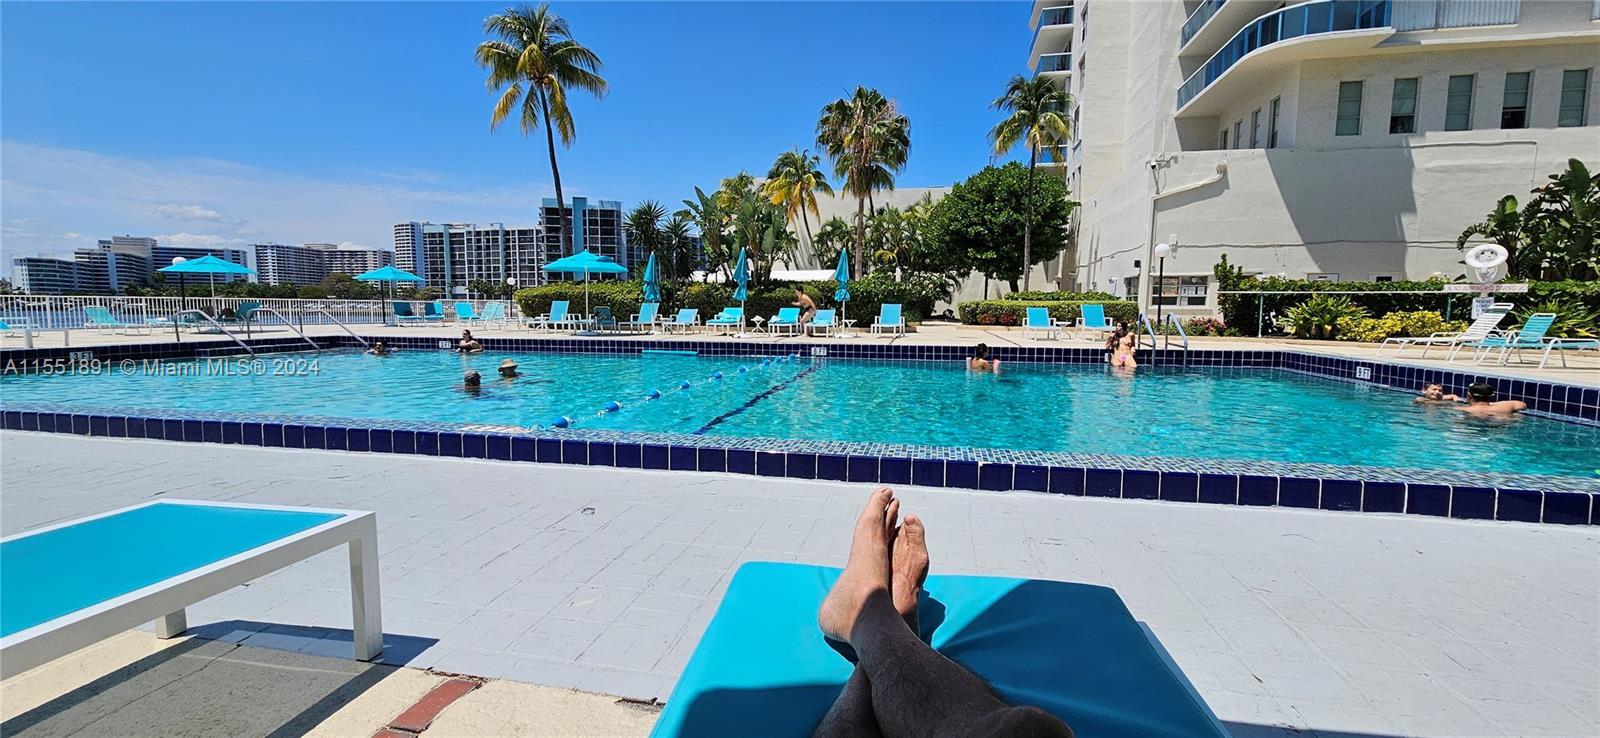 Photo of 3800 S Ocean Dr #322 in Hollywood, FL